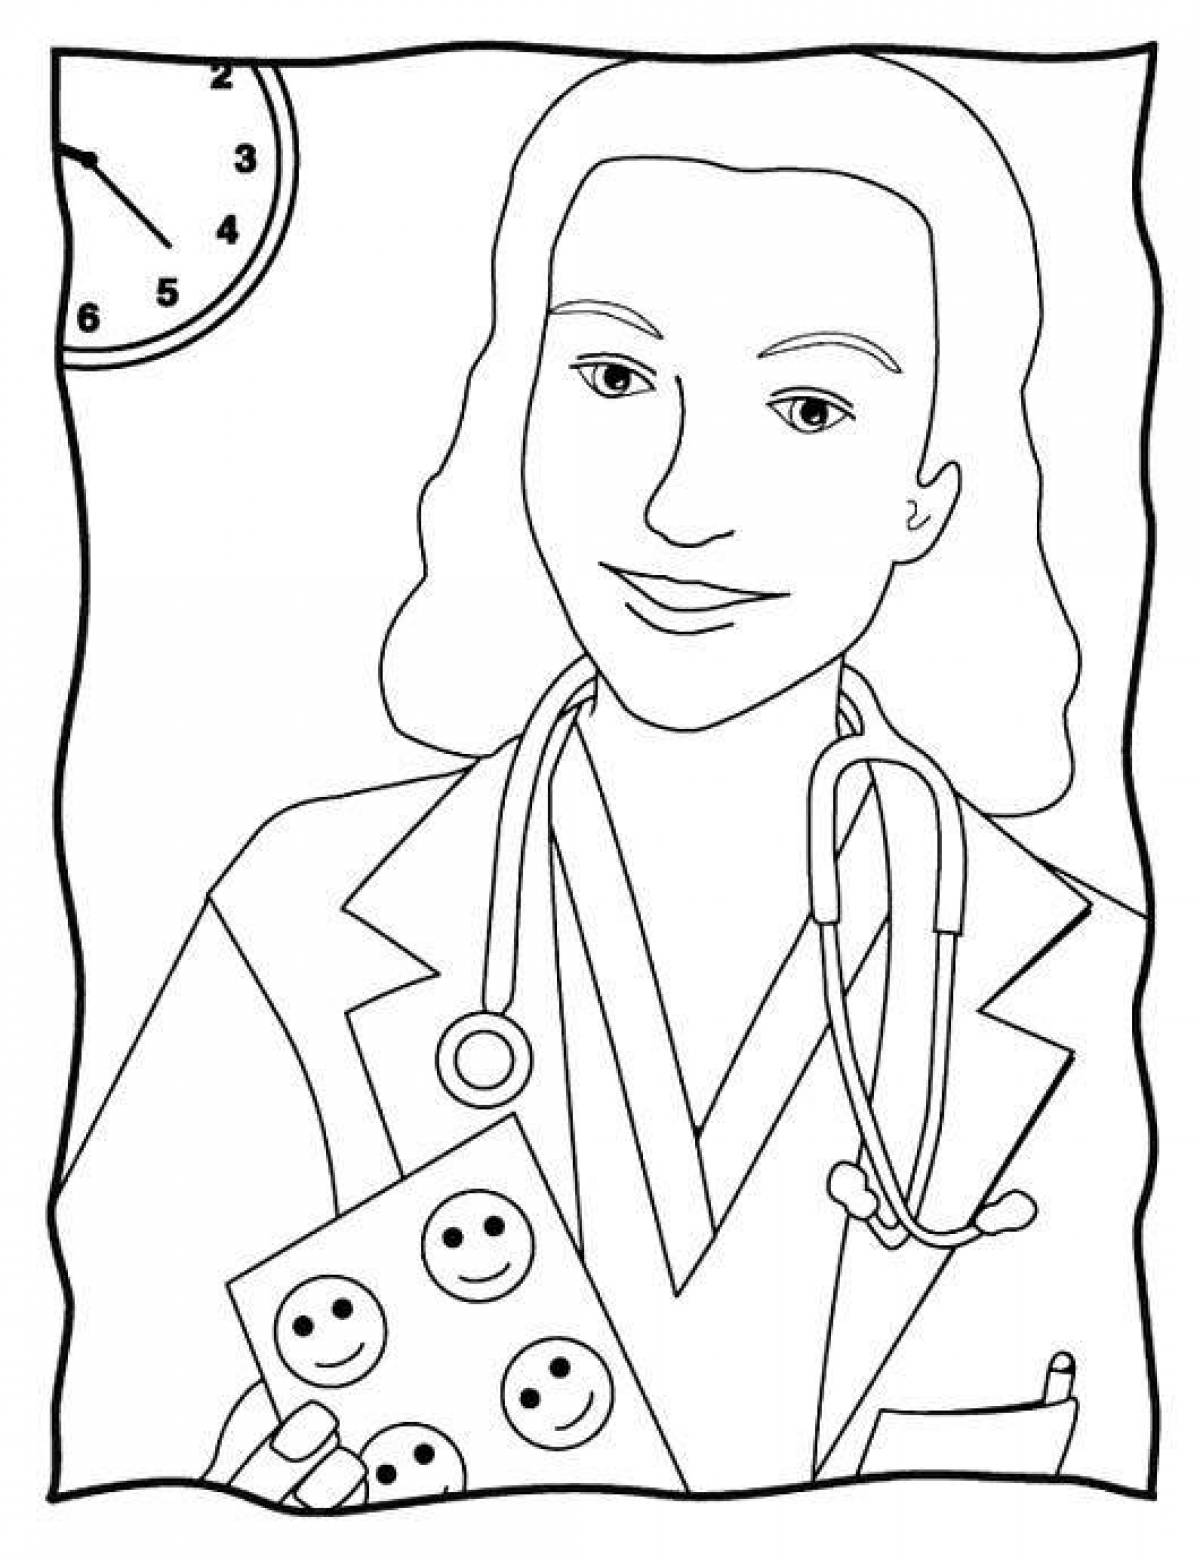 Charming doctor profession coloring page